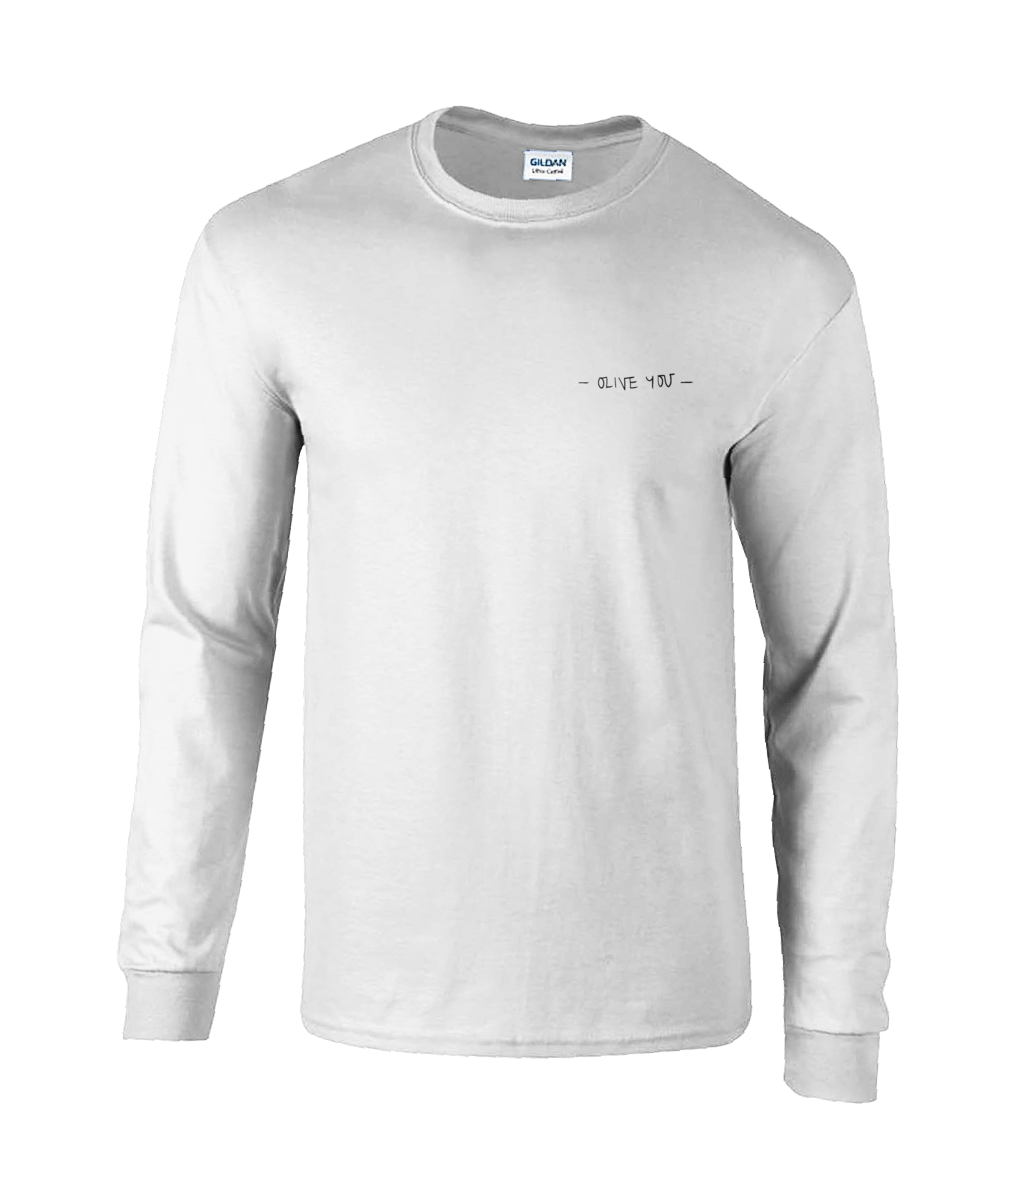 Olive You Long Sleeve T-Shirt